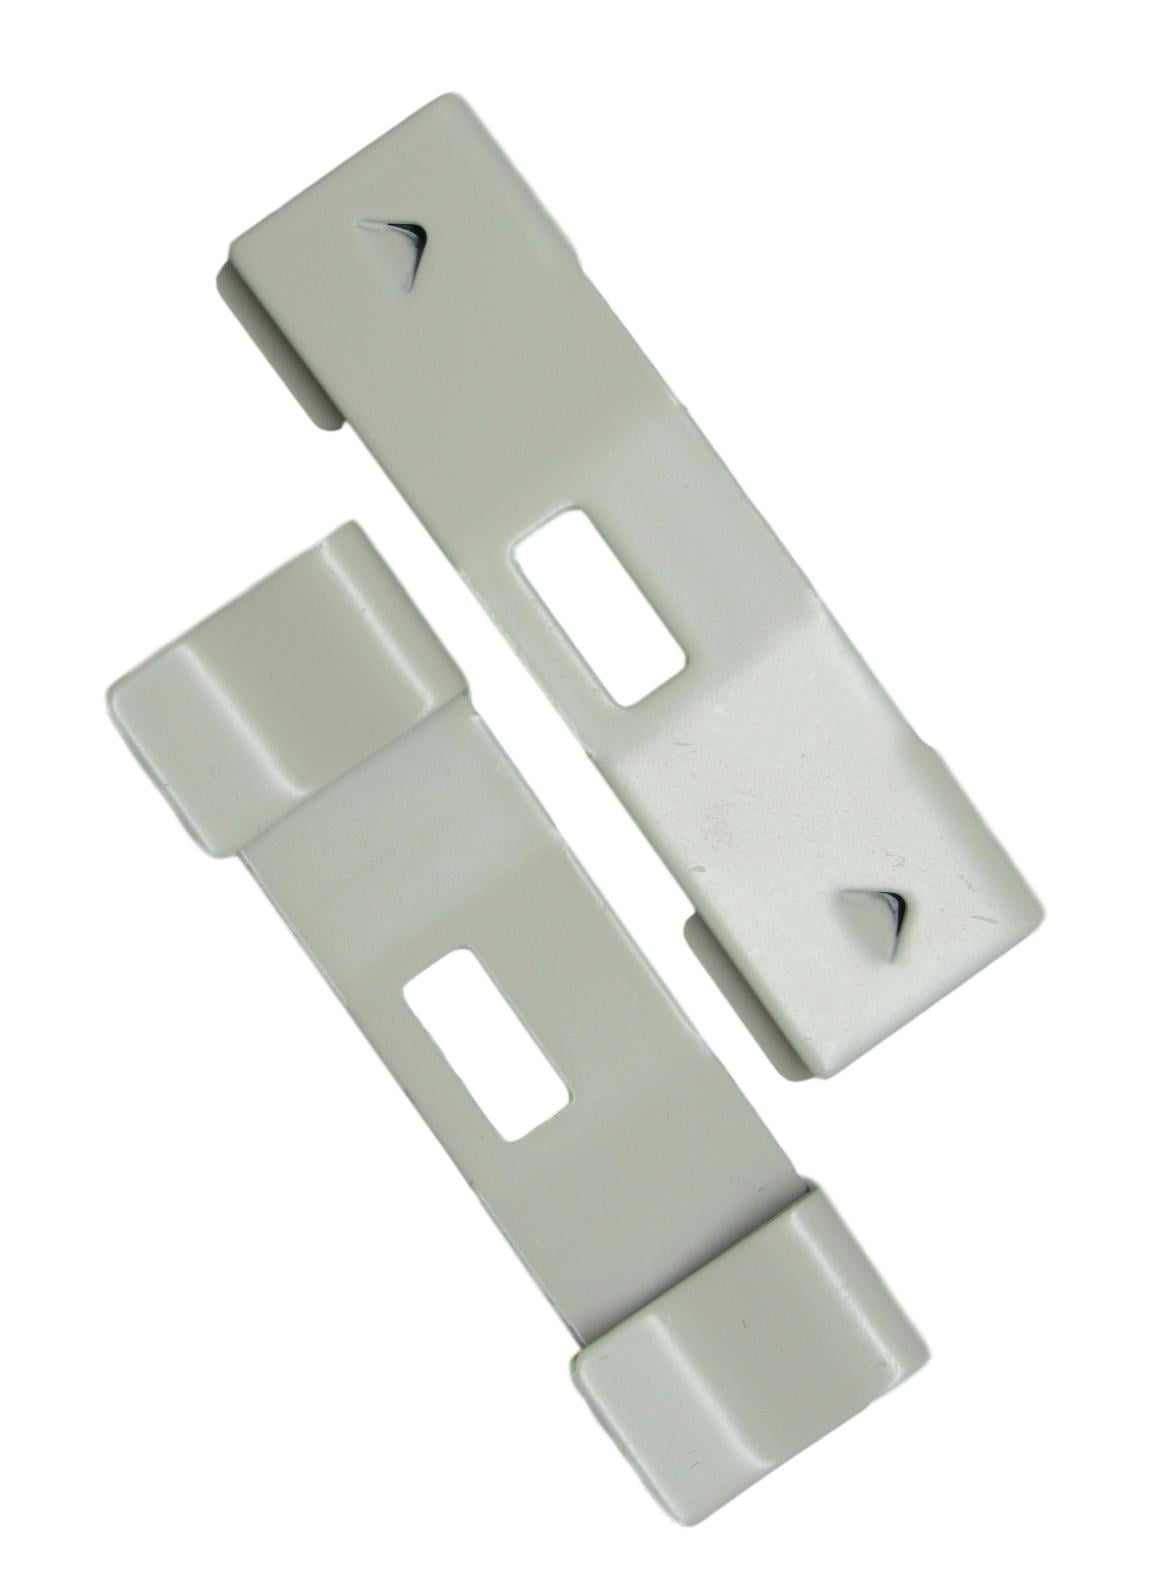 Buy a 10 Pack And Get a 5 PACK FREE-VERTICAL BLIND CURVED REPAIR CLIPS VaneSaver 